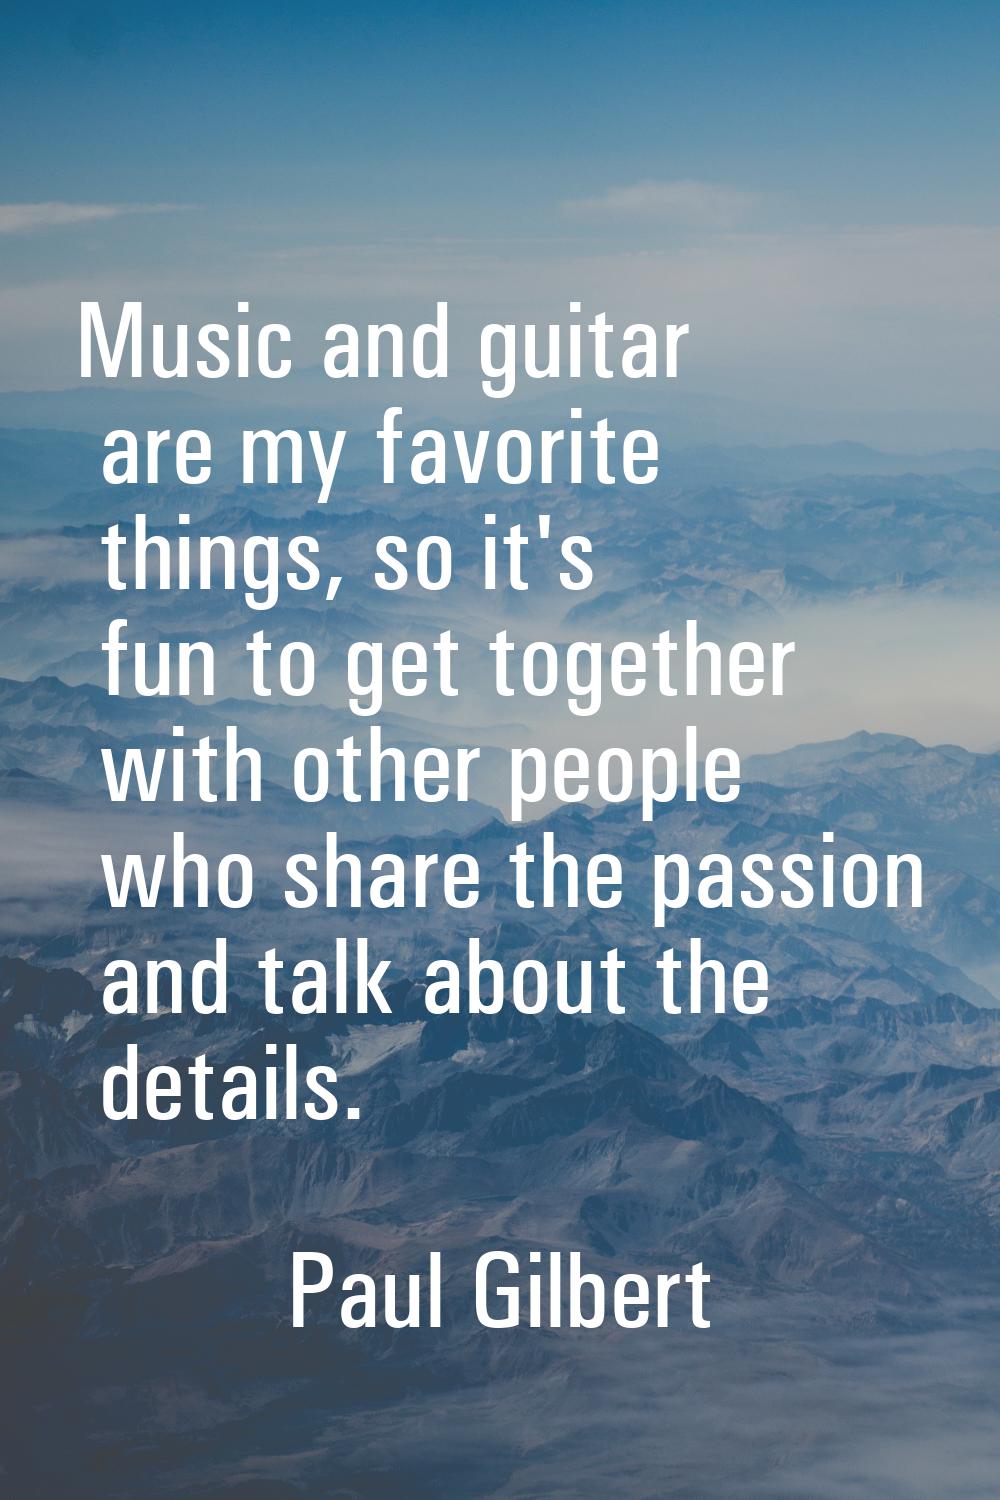 Music and guitar are my favorite things, so it's fun to get together with other people who share th